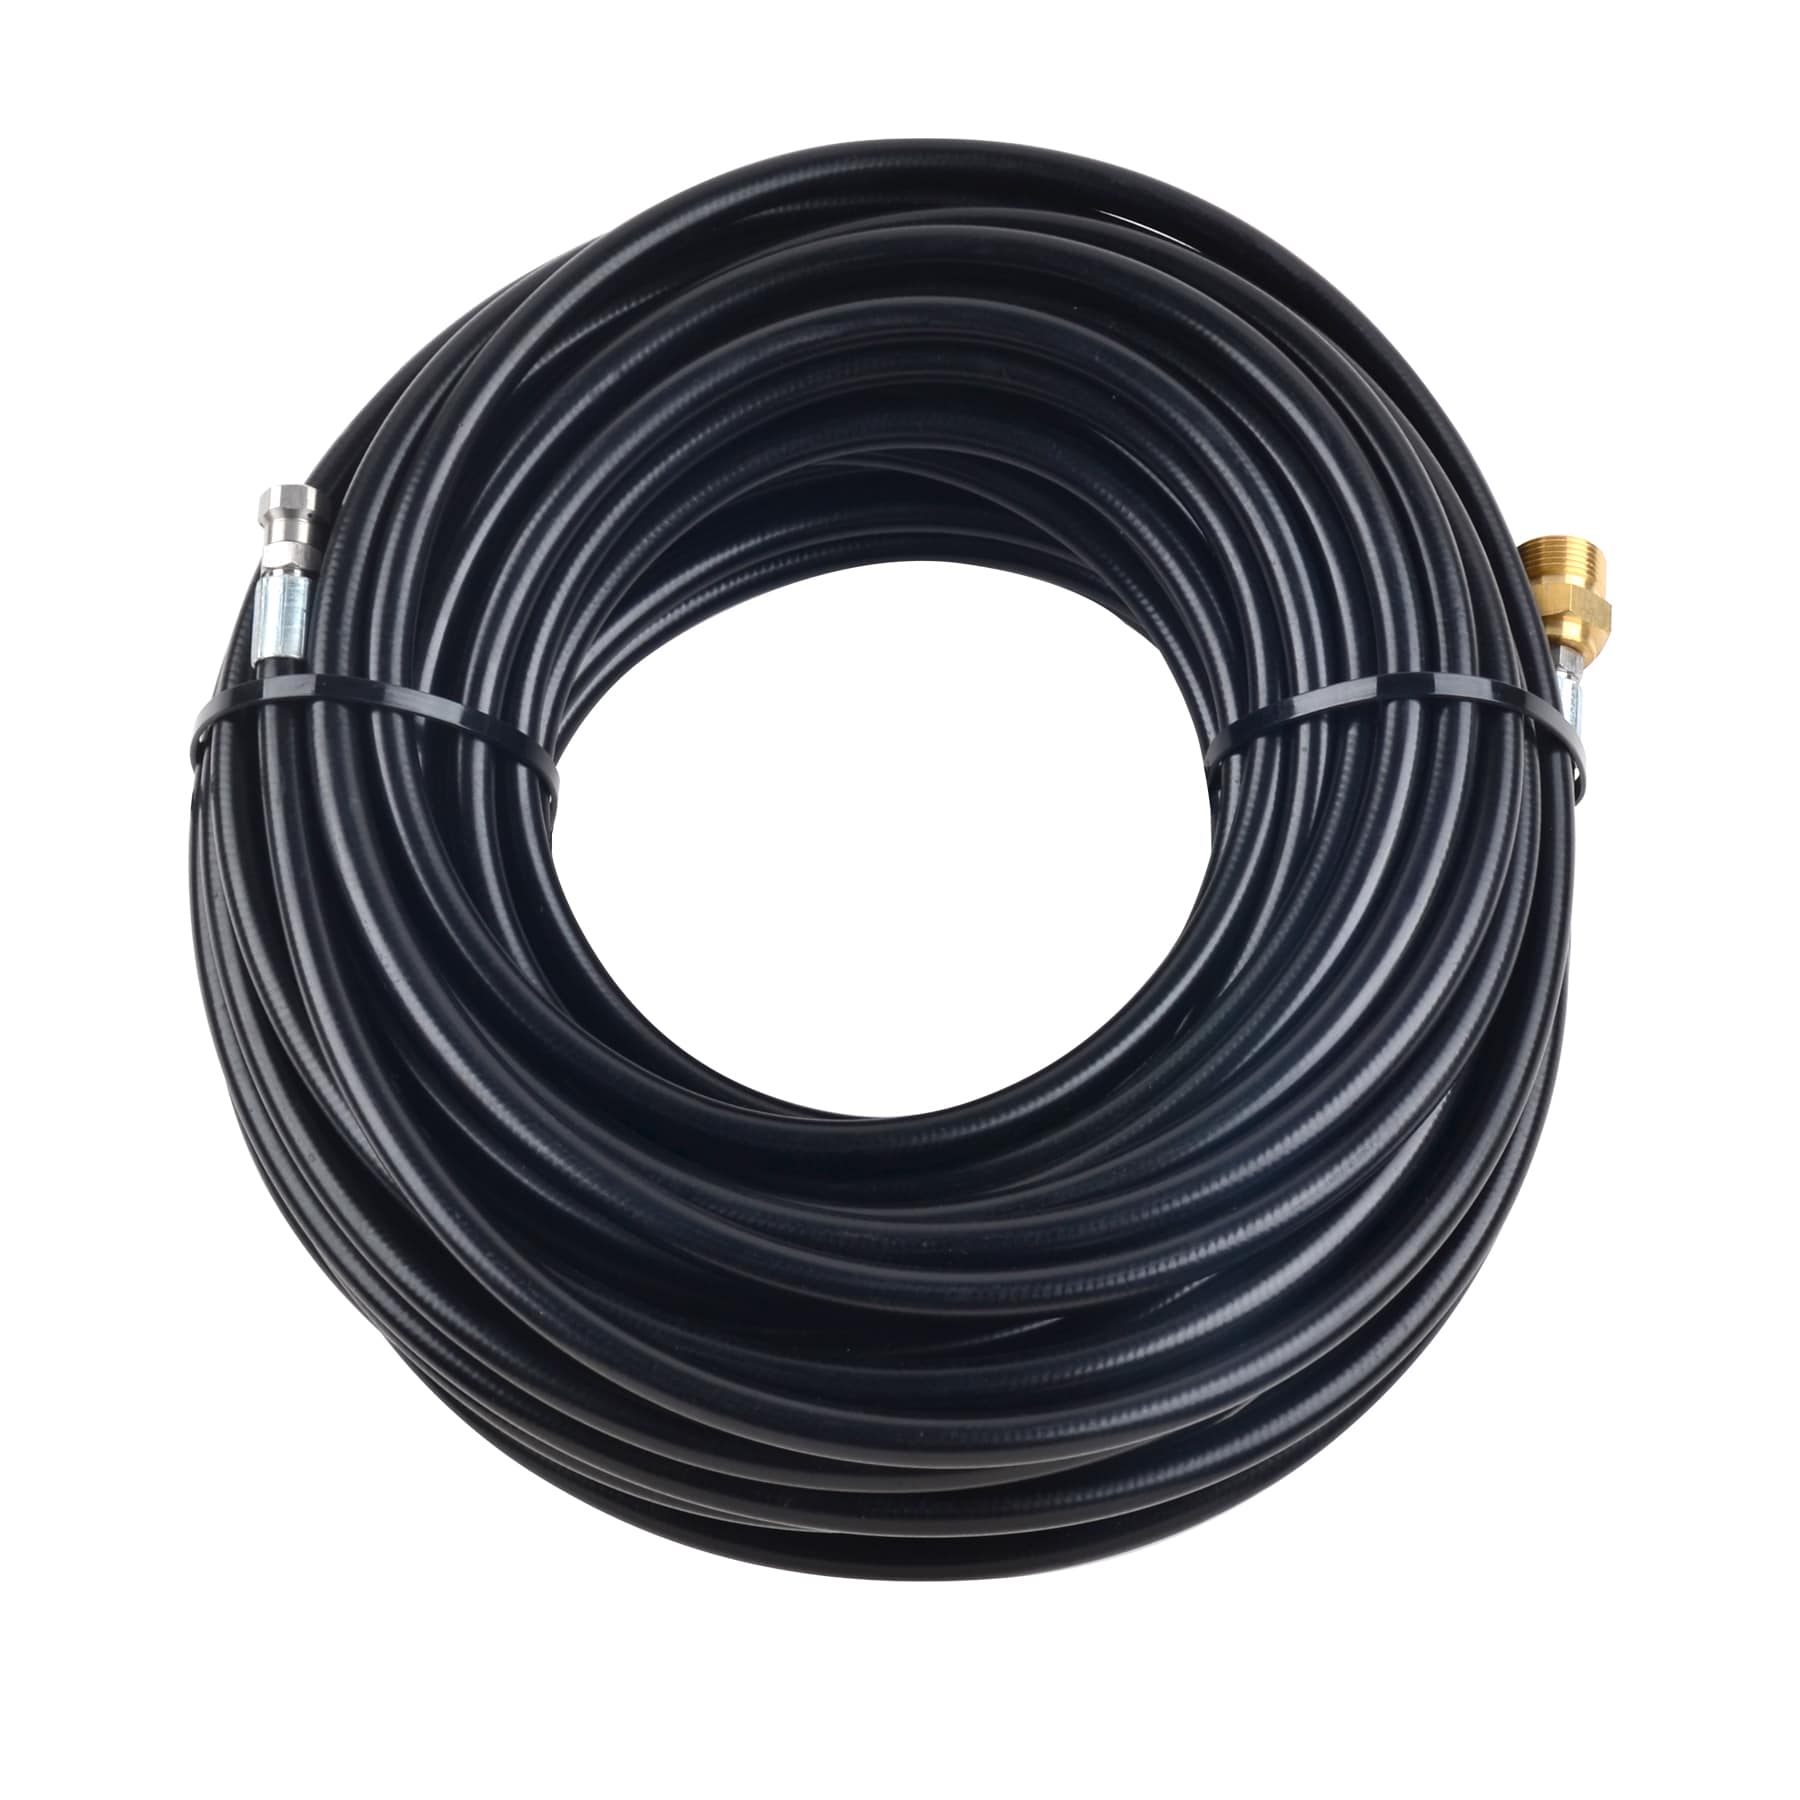 100 Ft. Sewer Jetter Drain Cleaner for High Flow Pressure Washers